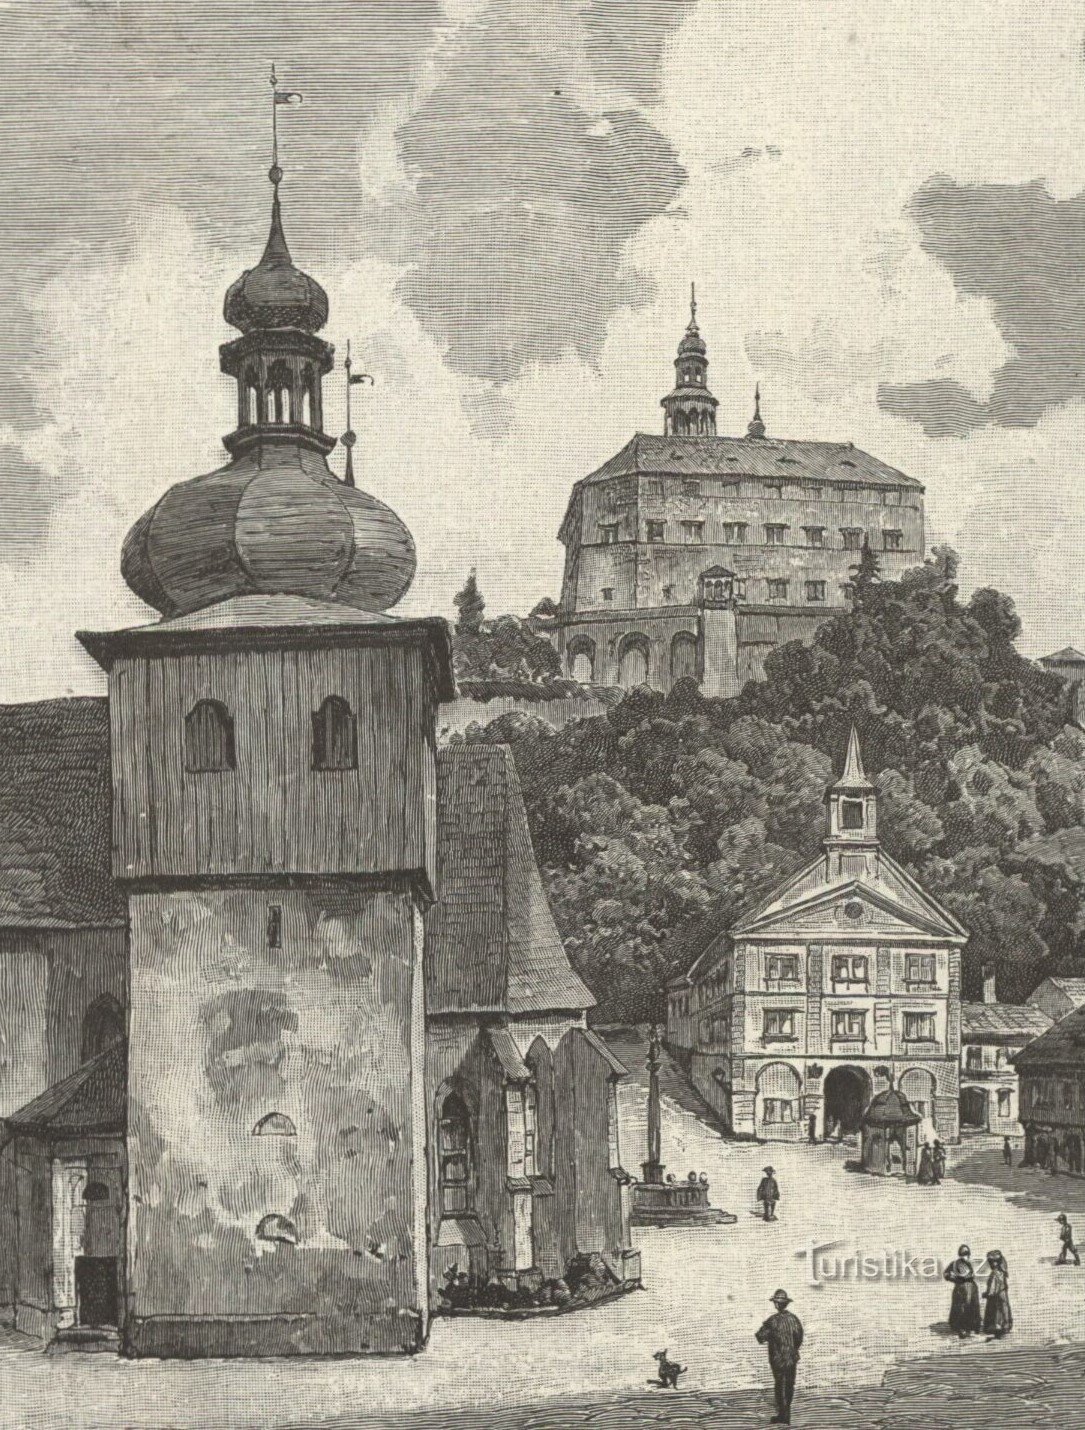 View of the Náchod castle from the second half of the 2th century